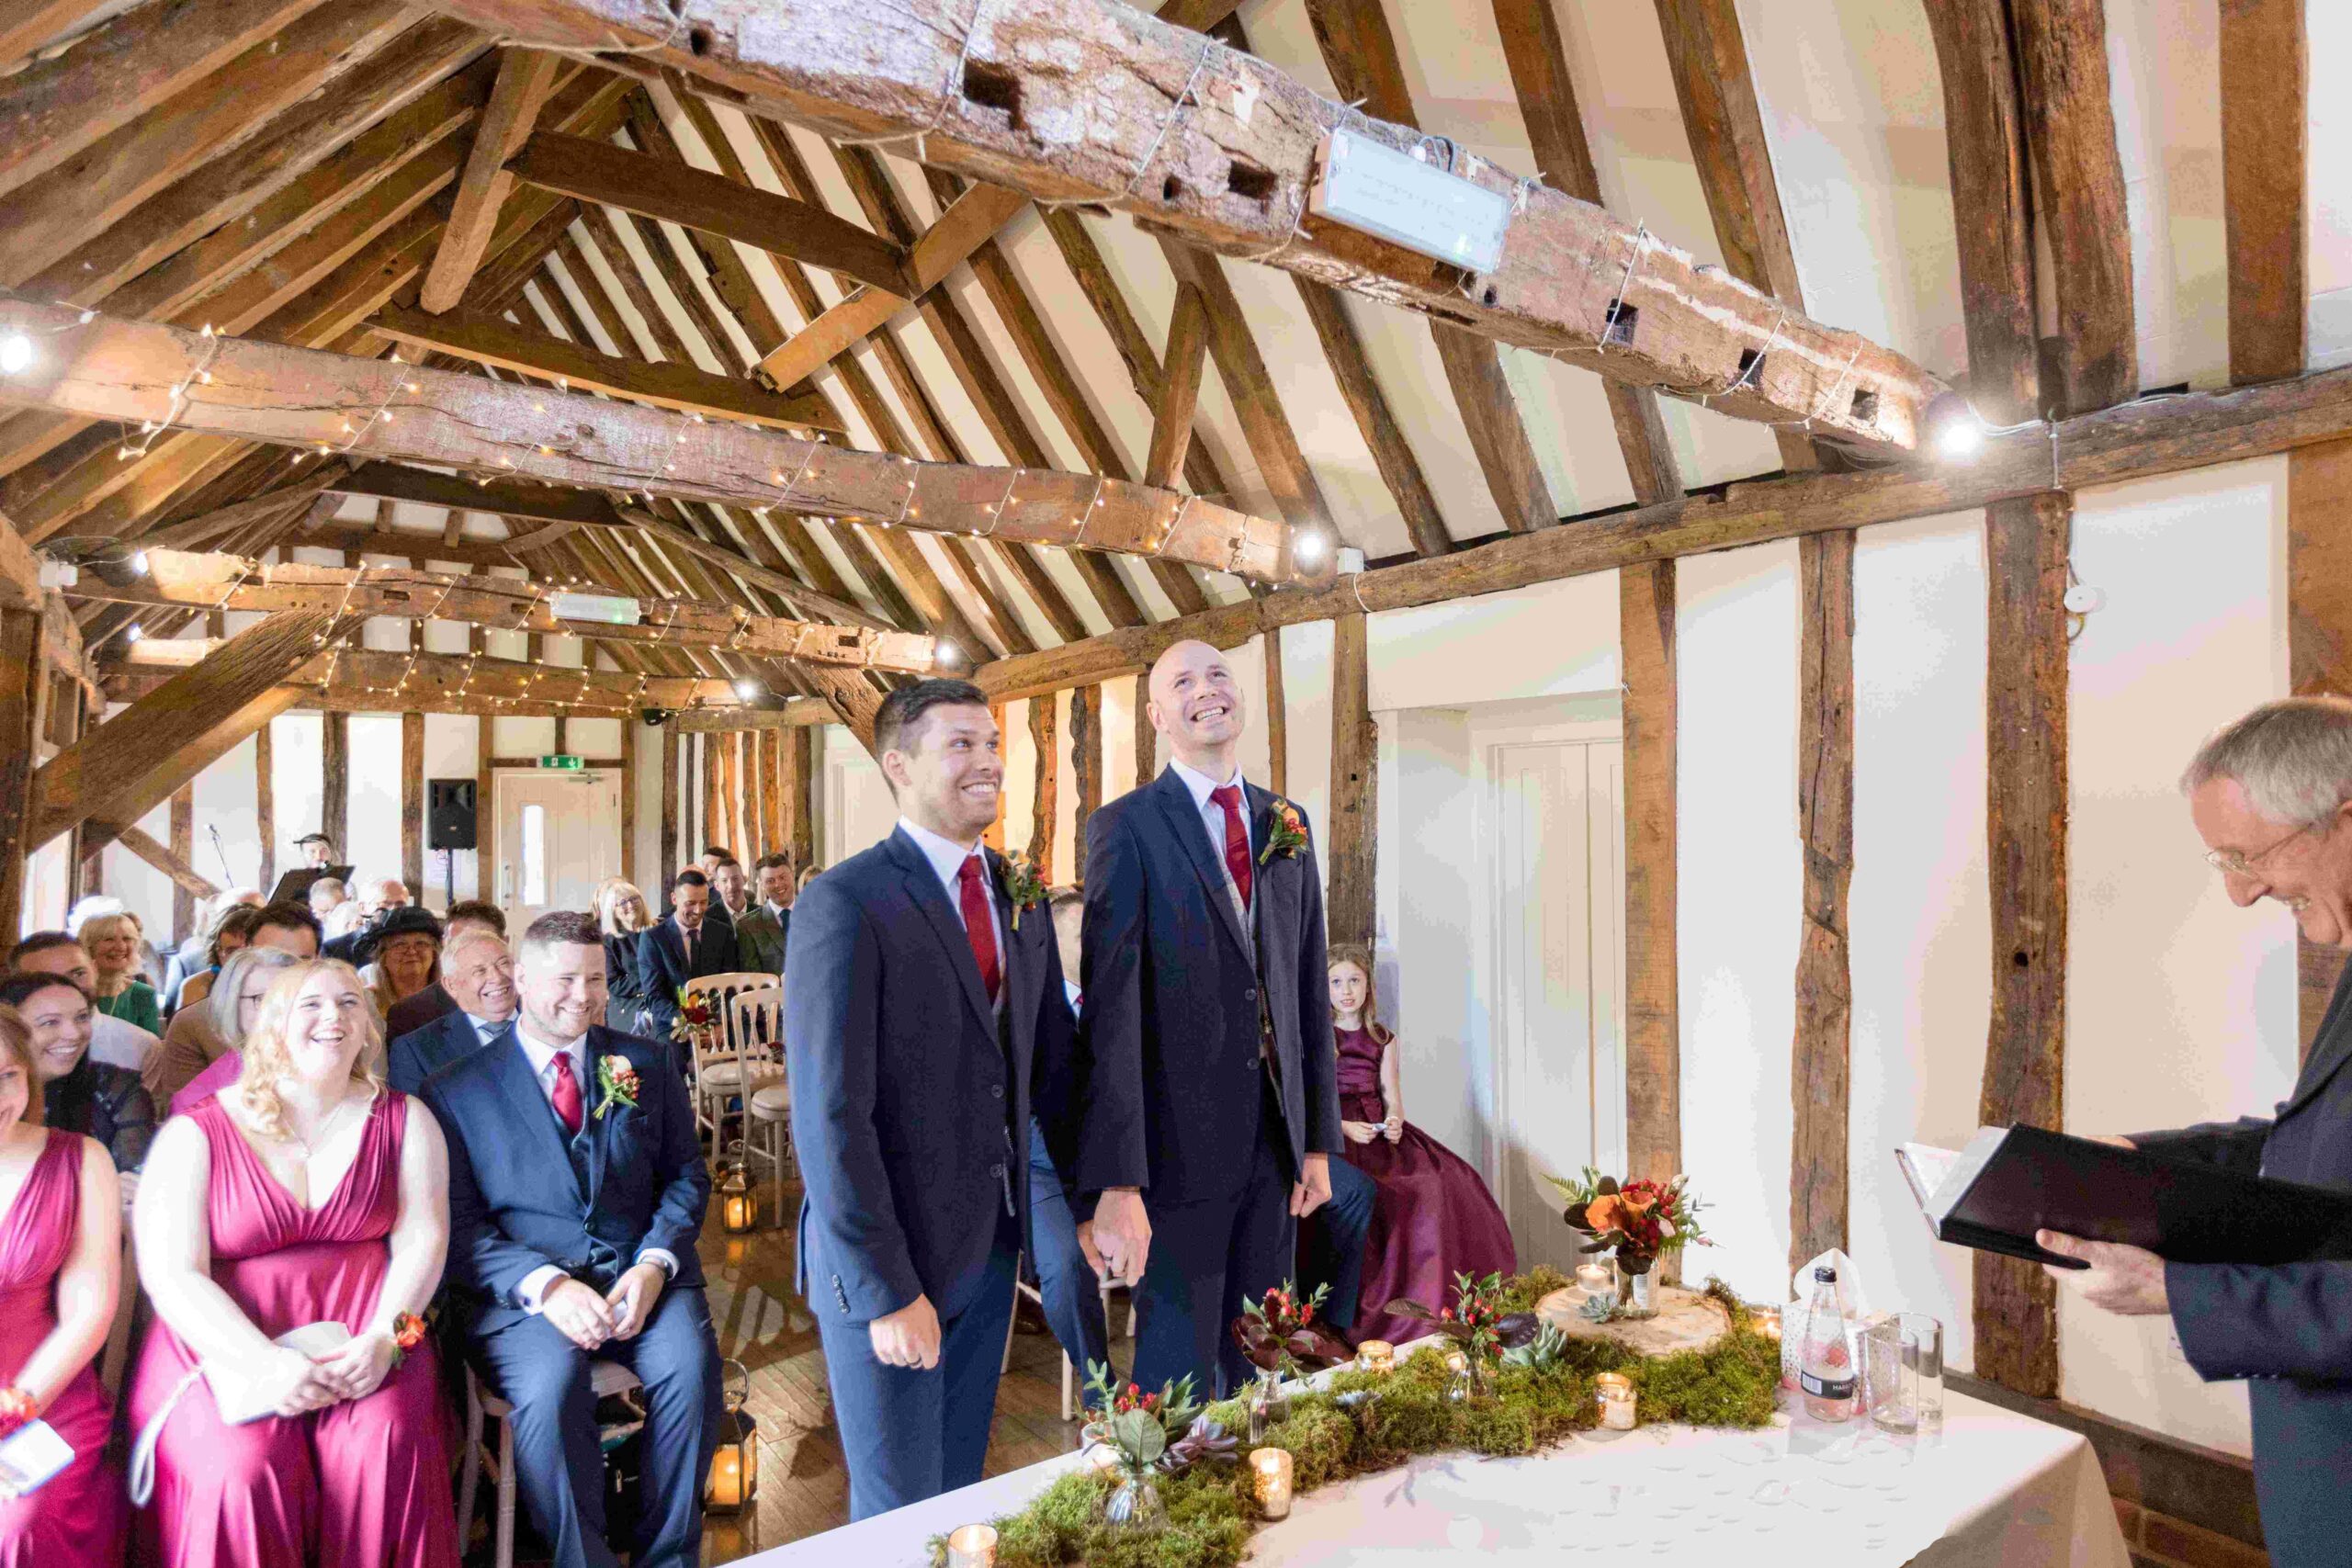 A Ceremony held at Little Channels, Essex